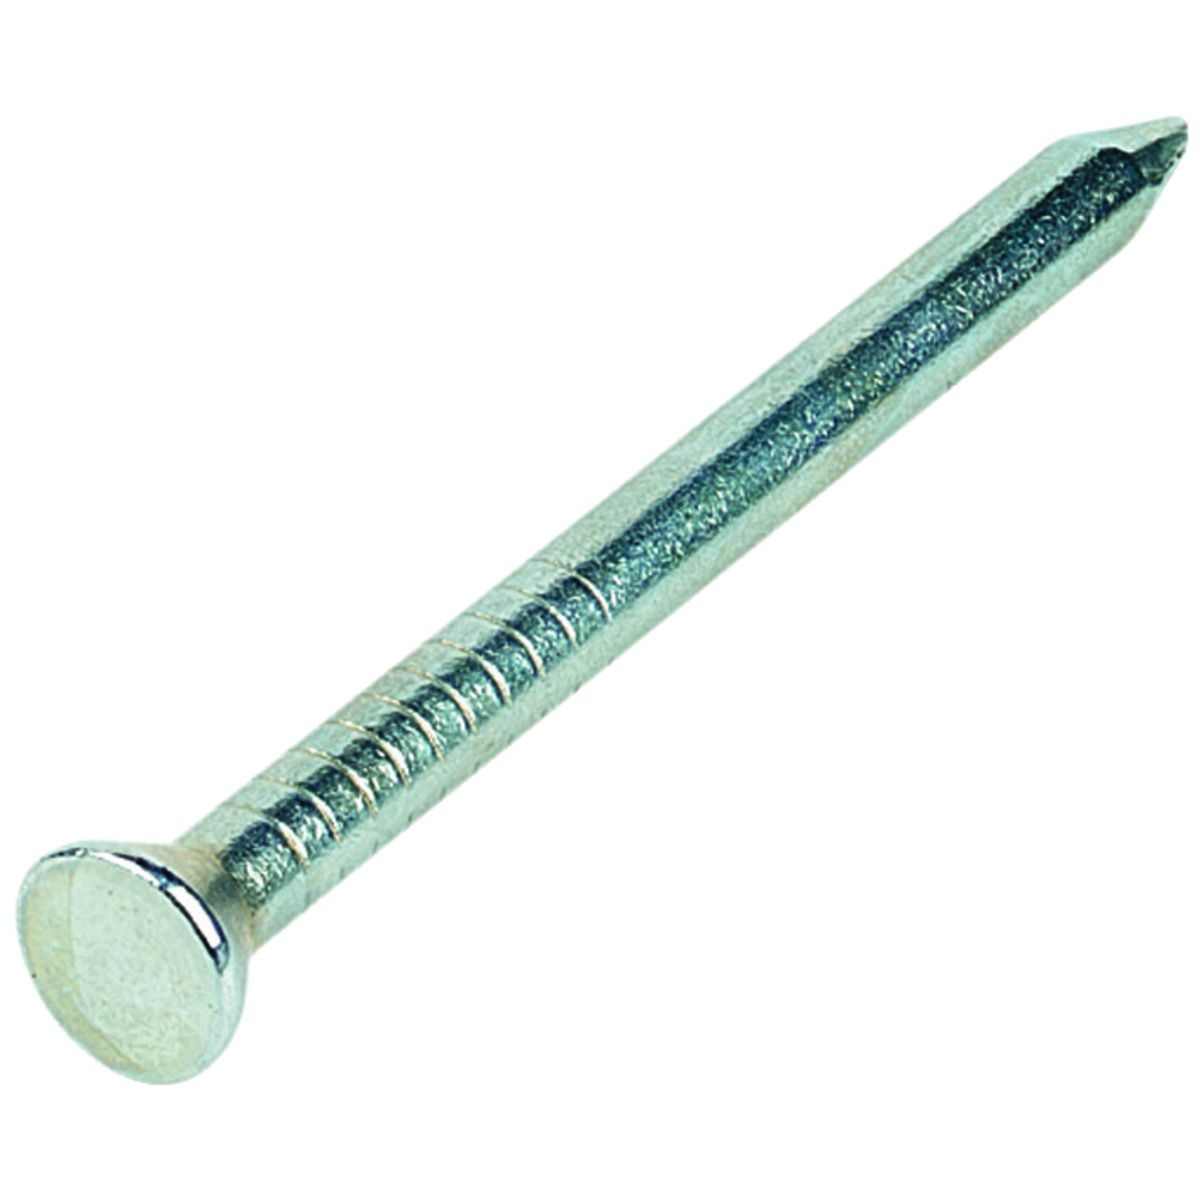 Image of Wickes 30mm Countersunk Head Masonry Nails - Pack of 100